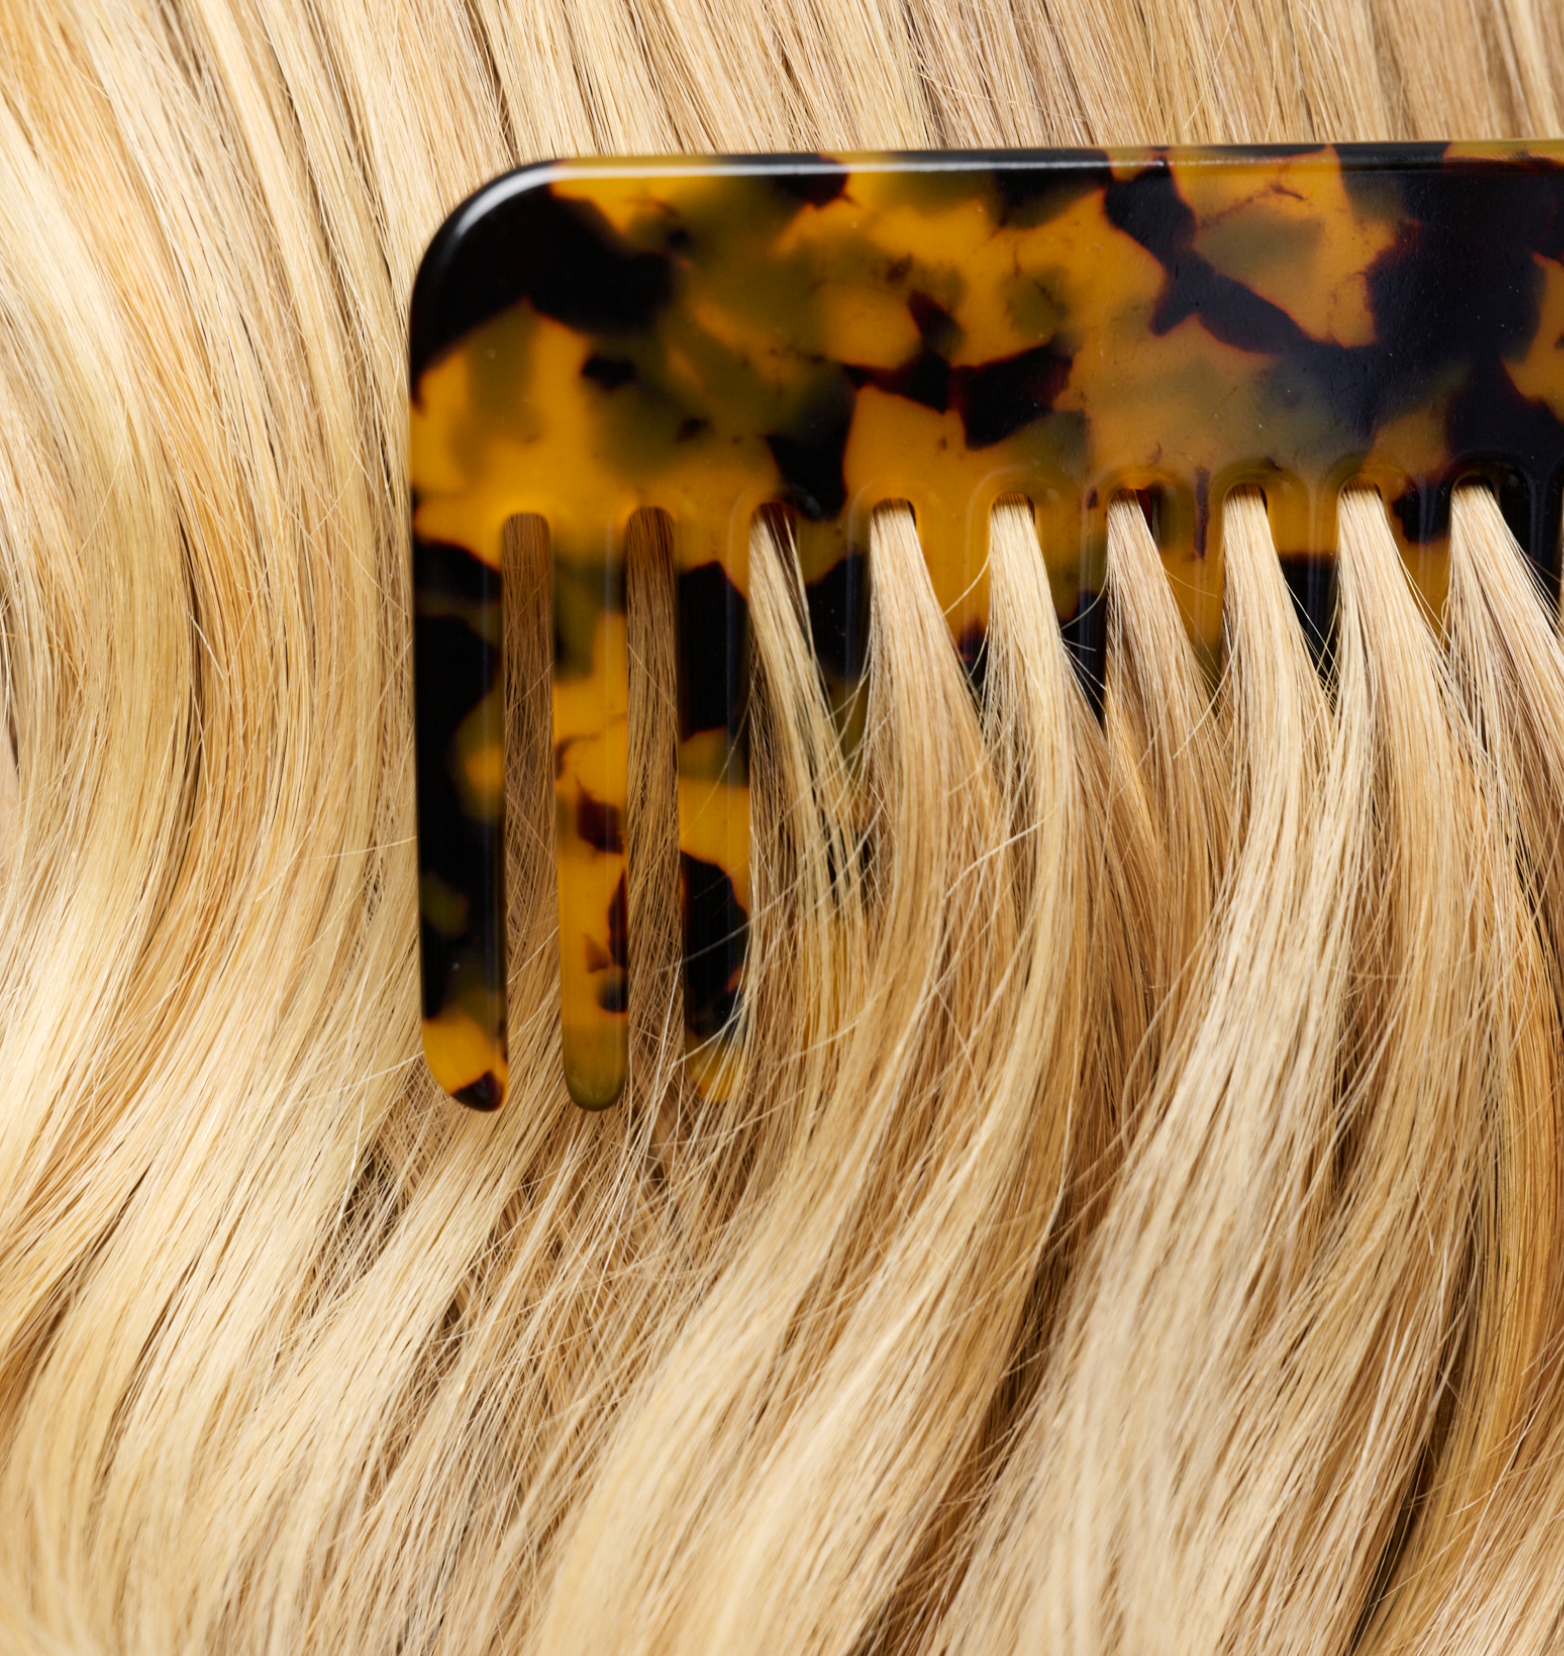 A close up of a comb running through healthy and shiny blonde hair.